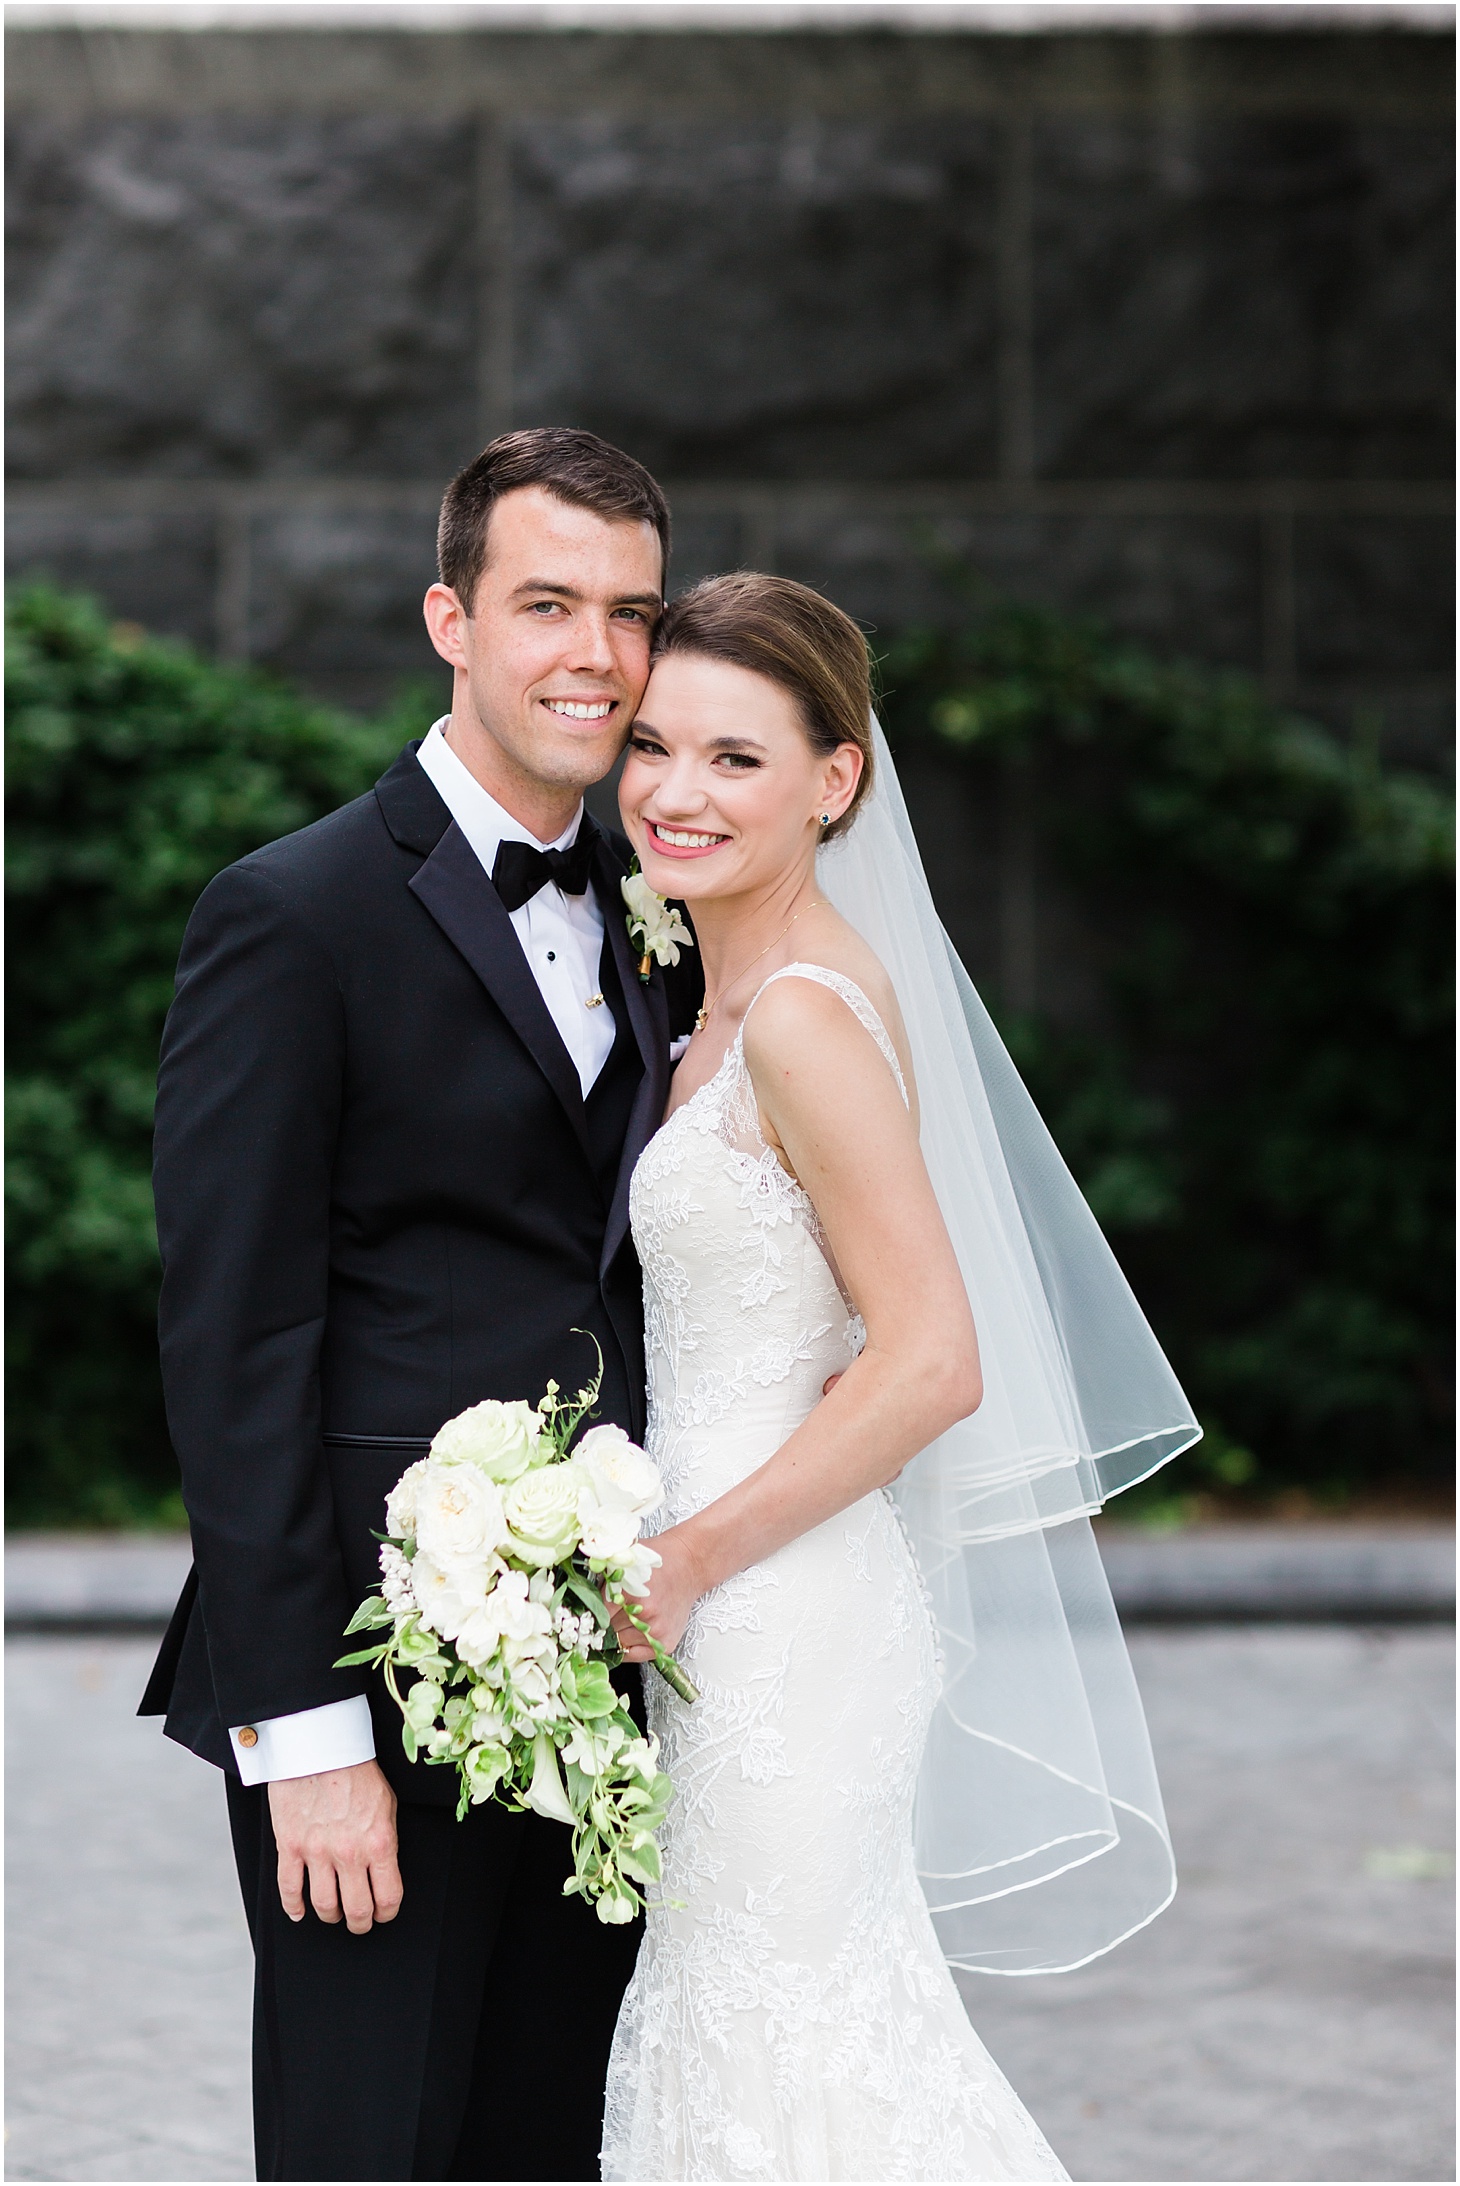 Wedding Portraits at Capitol Visitors Center, Black Tie Hay-Adams Wedding with Summer Florals, Ceremony at Capitol Hill Baptist Church, Sarah Bradshaw Photography, DC Wedding Photographer